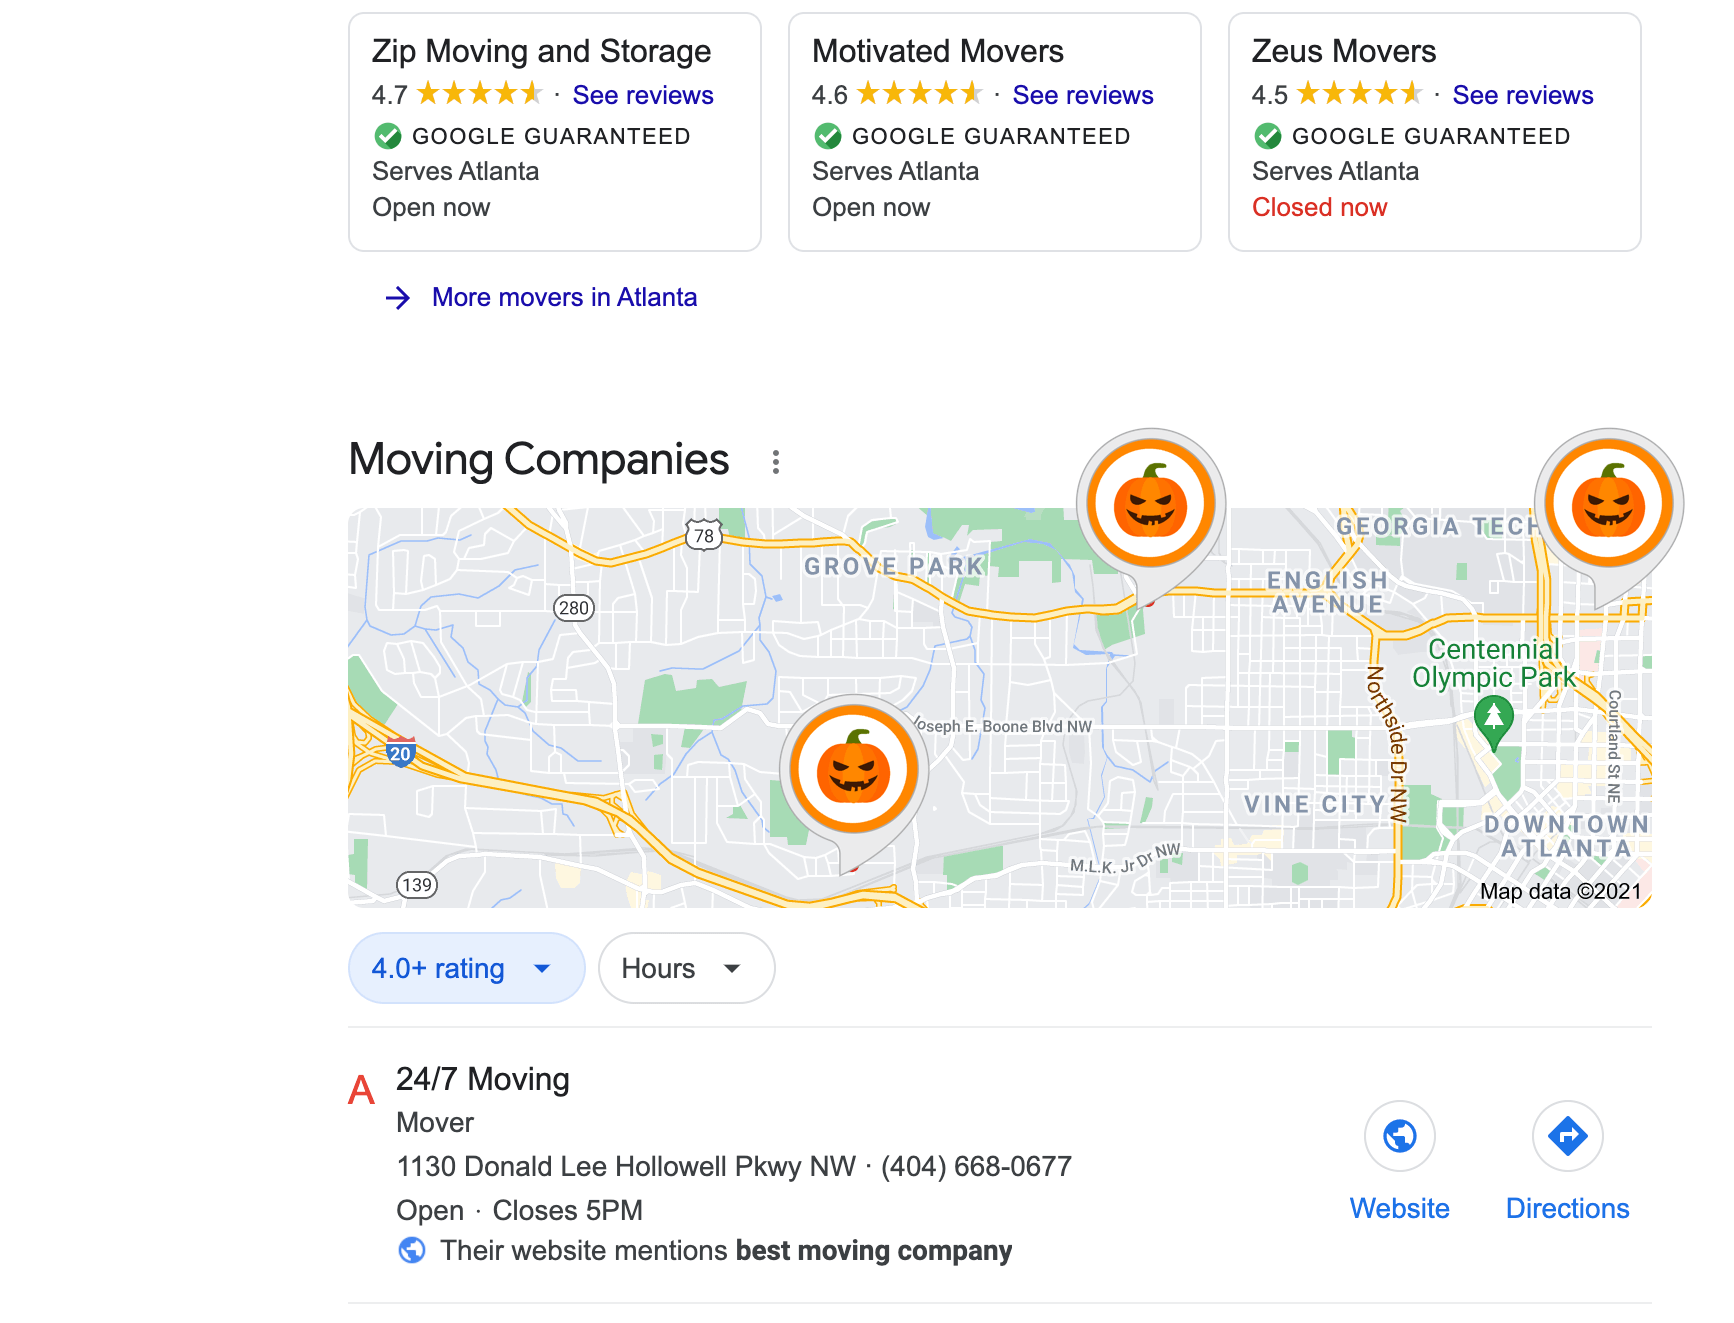 scary local google results